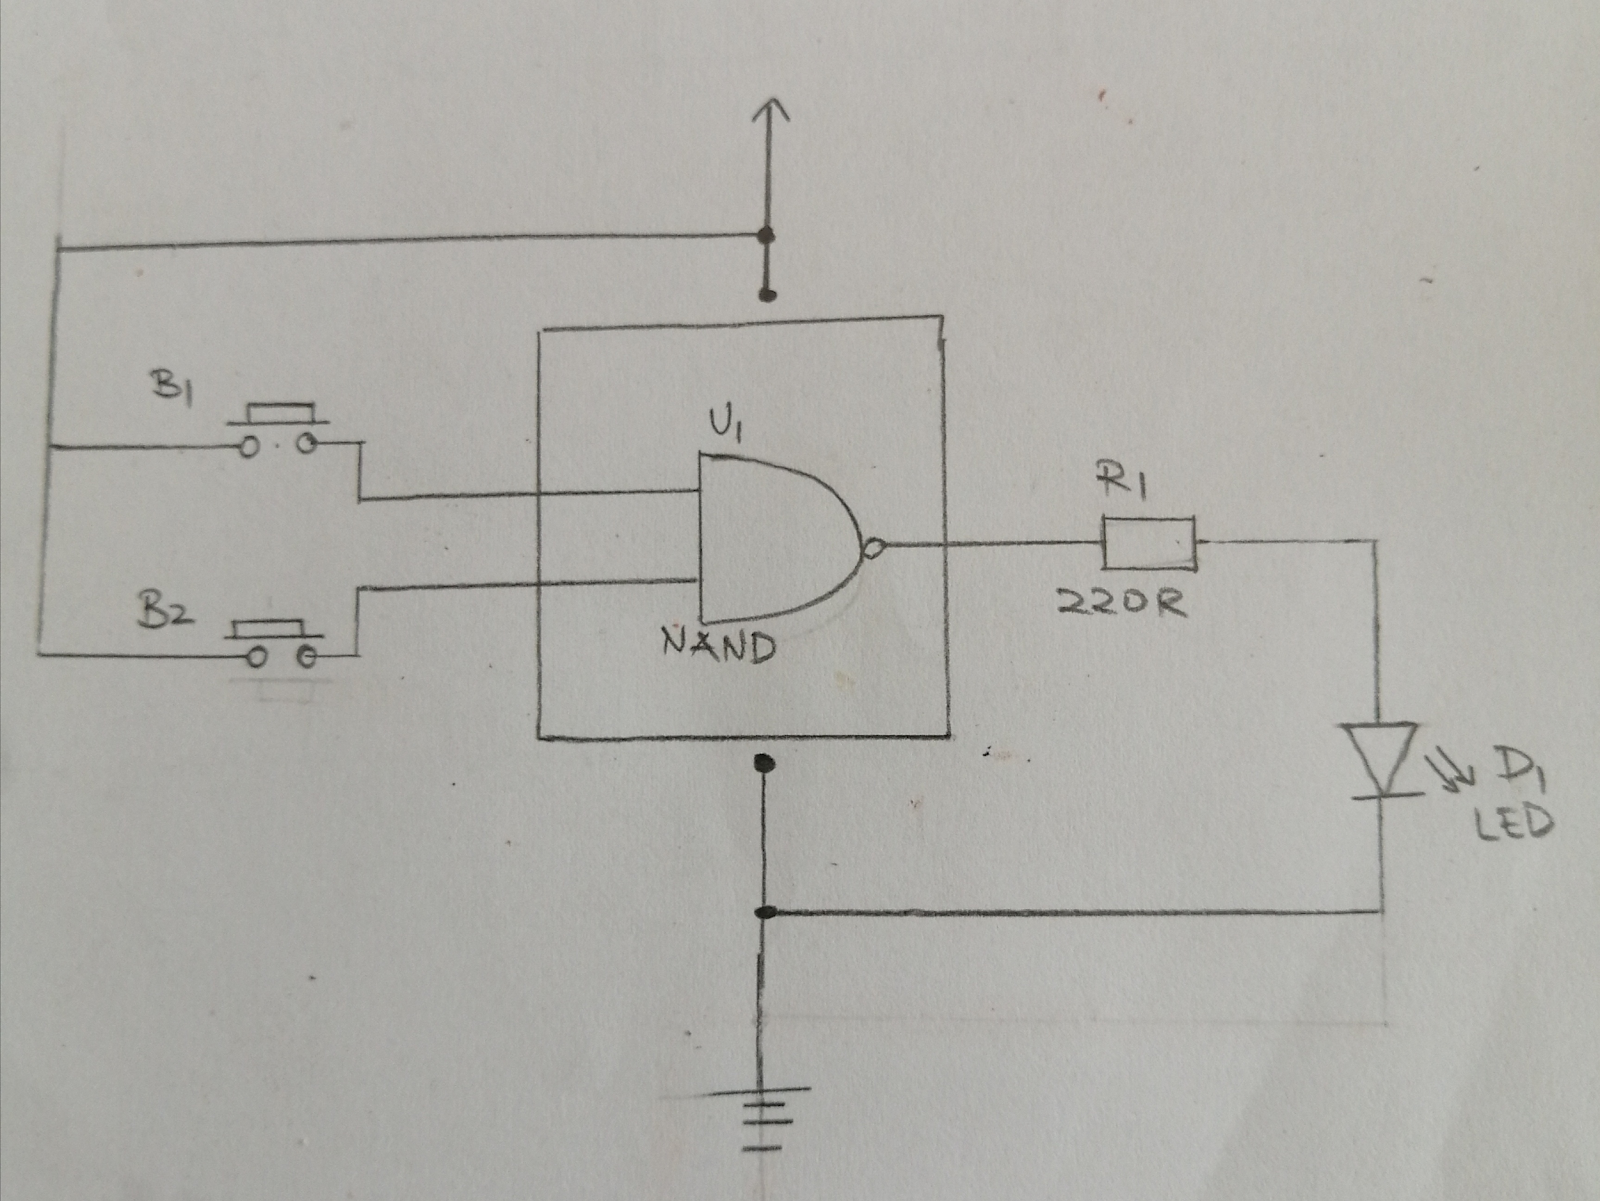 application circuit for a NAND gate